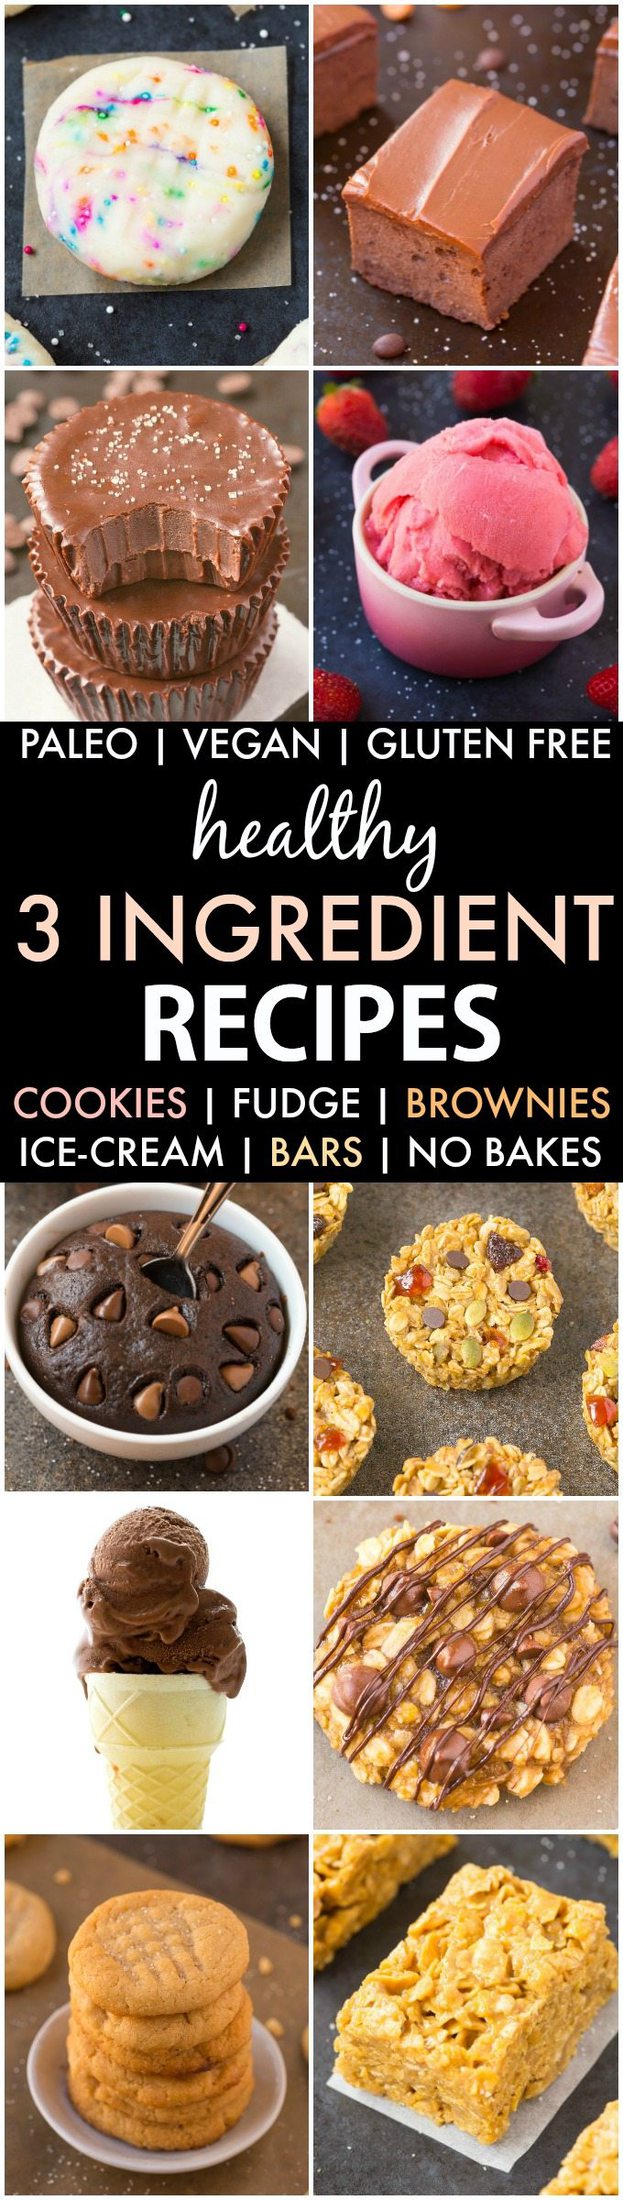 Healthy 3-Ingredient Recipes (V, GF, P, DF)- Quick, easy and guilt-free desserts, snacks and treats which use just three ingredients and use wholesome, clean ingredients! {vegan, gluten free, paleo recipe}- thebigmansworld.com